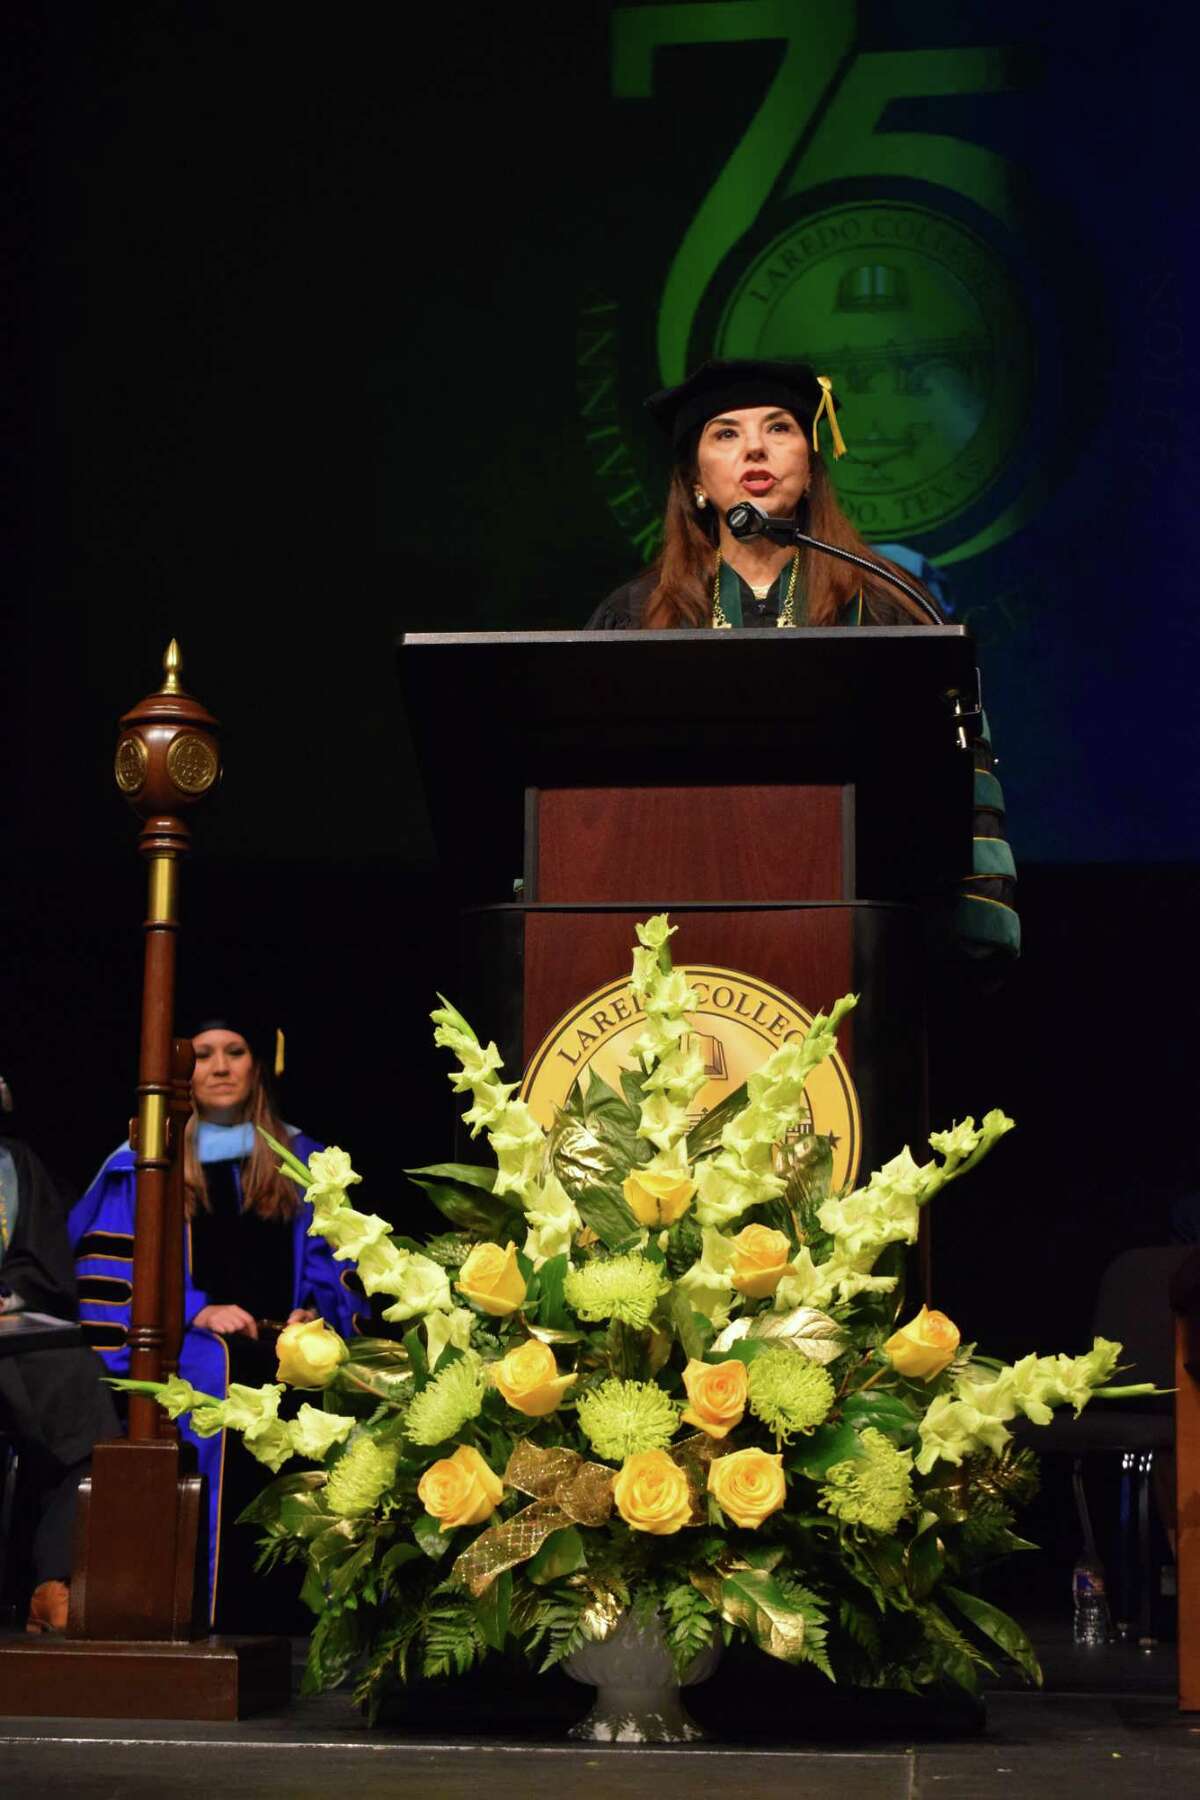 Laredo College celebrated the investiture of its eighth president, Dr. Minita Ramirez, during a ceremony Monday as city leaders gathered to welcome her — the first female to head the institution in its 75 years.